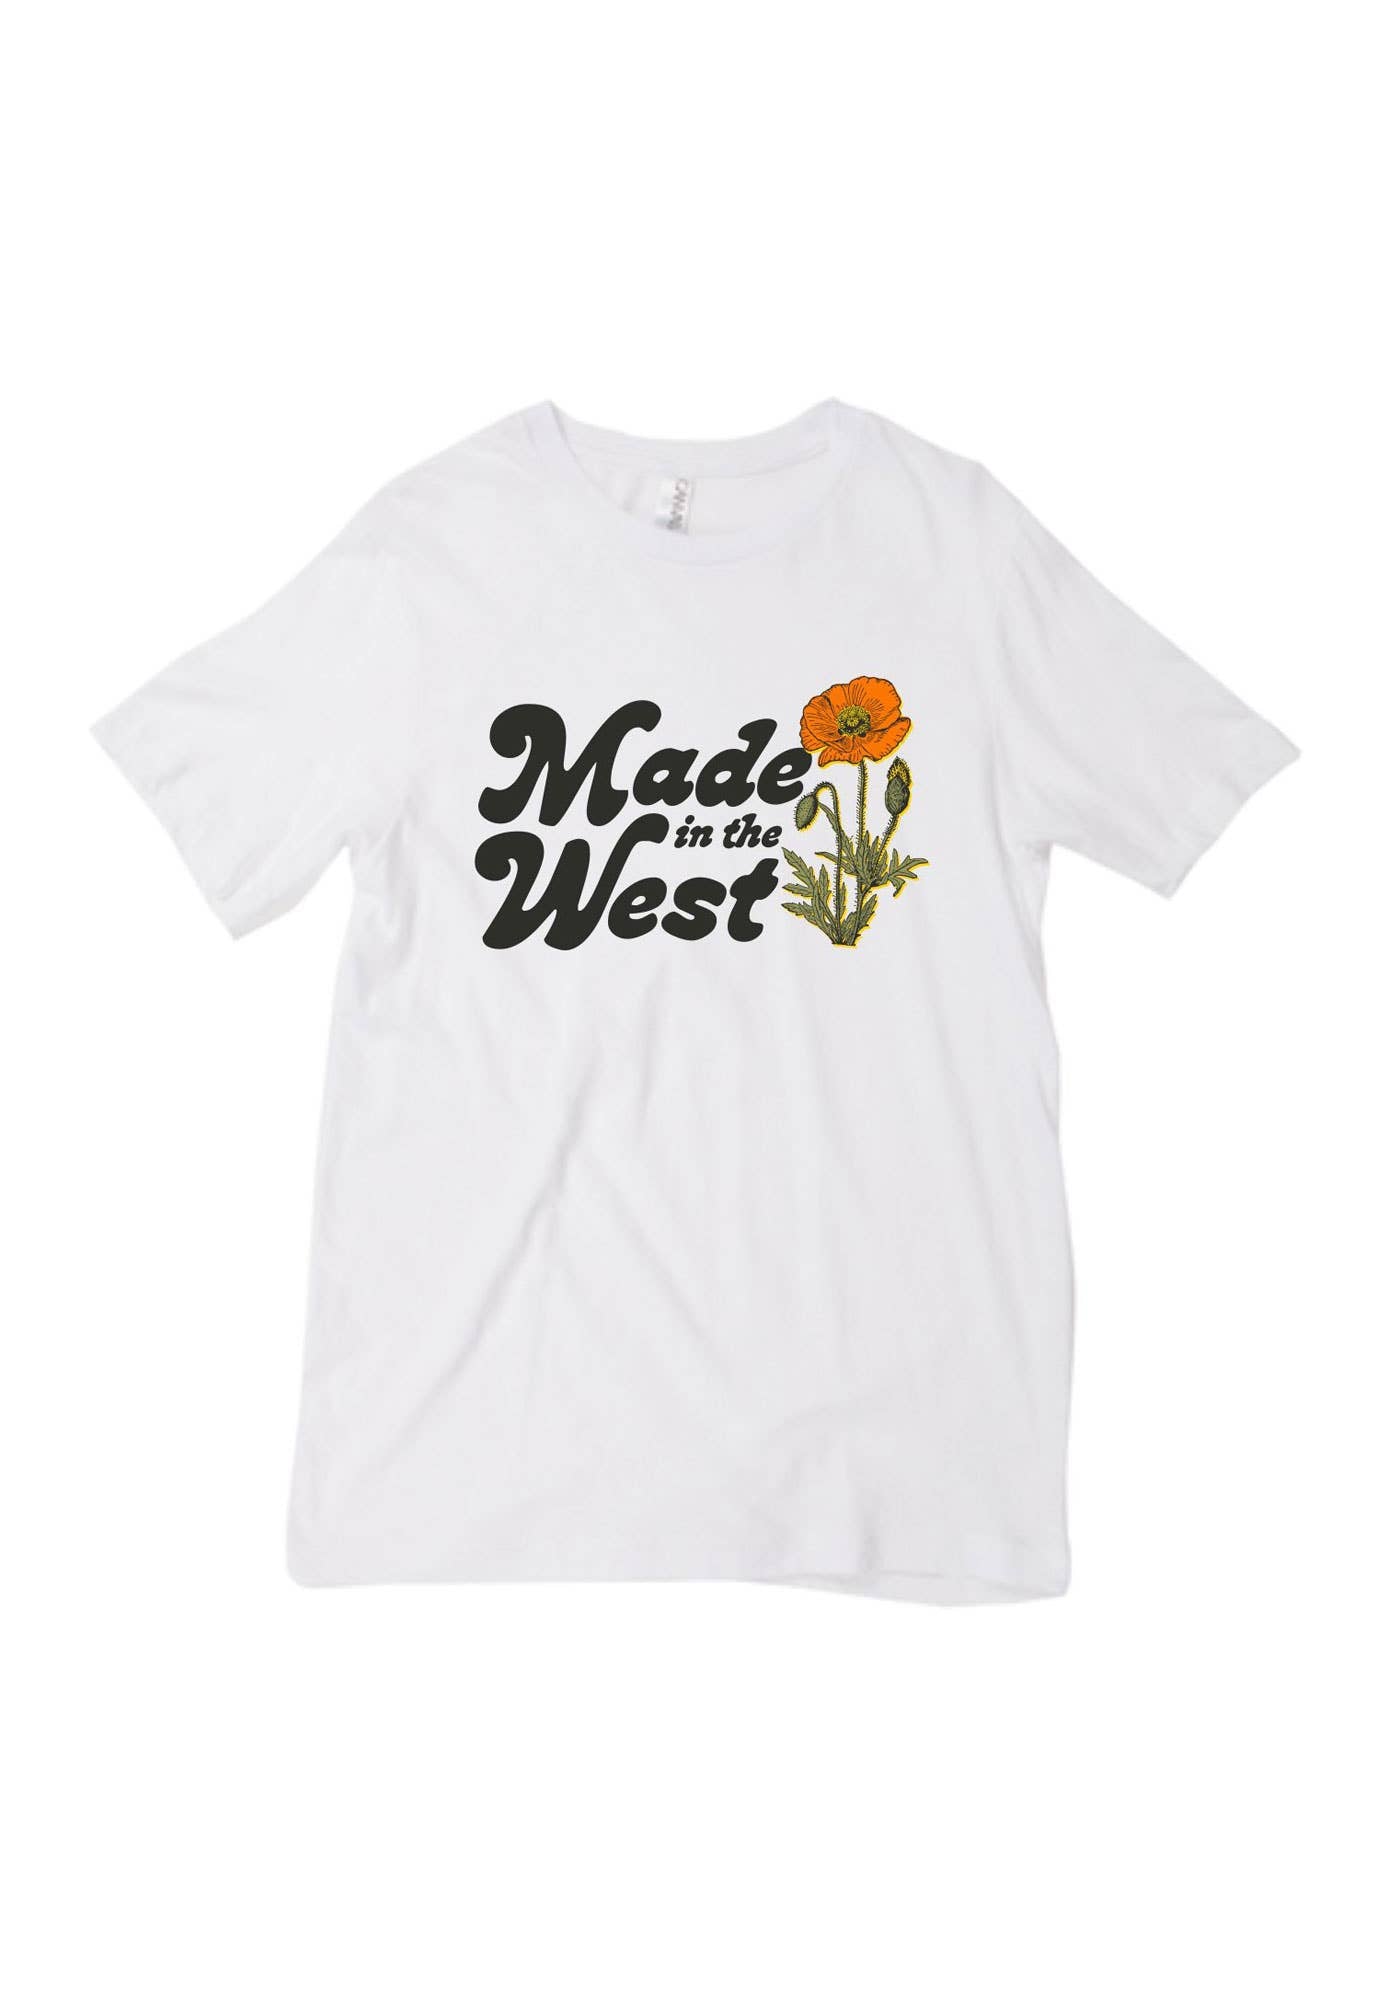 Made in the West Tee